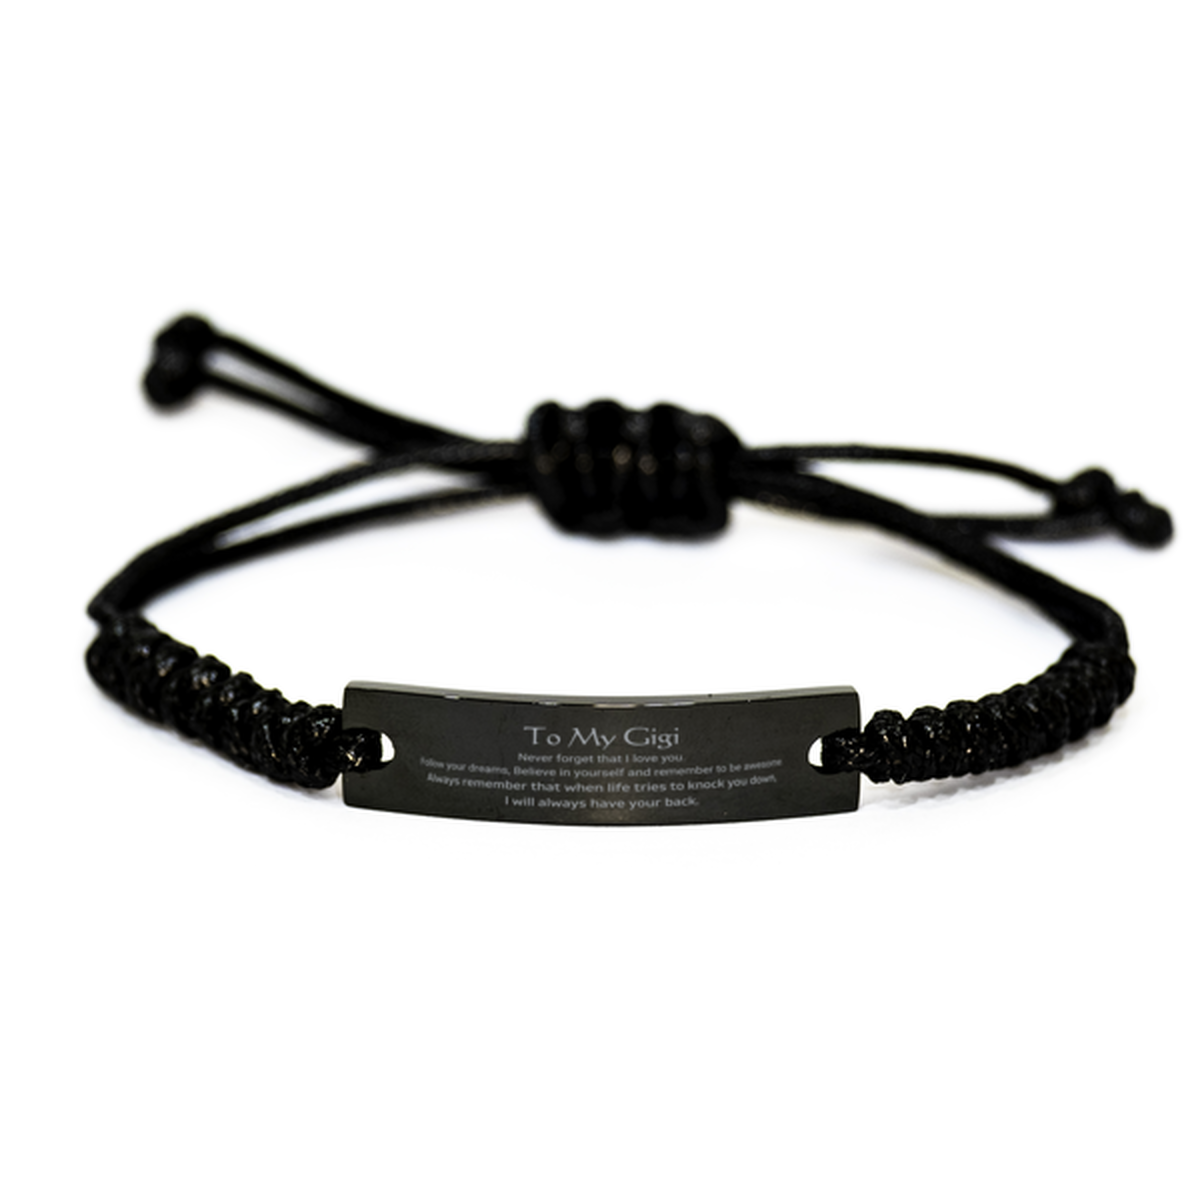 Inspirational Gifts for Gigi, Follow your dreams, Believe in yourself, Gigi Black Rope Bracelet, Birthday Christmas Unique Gifts For Gigi